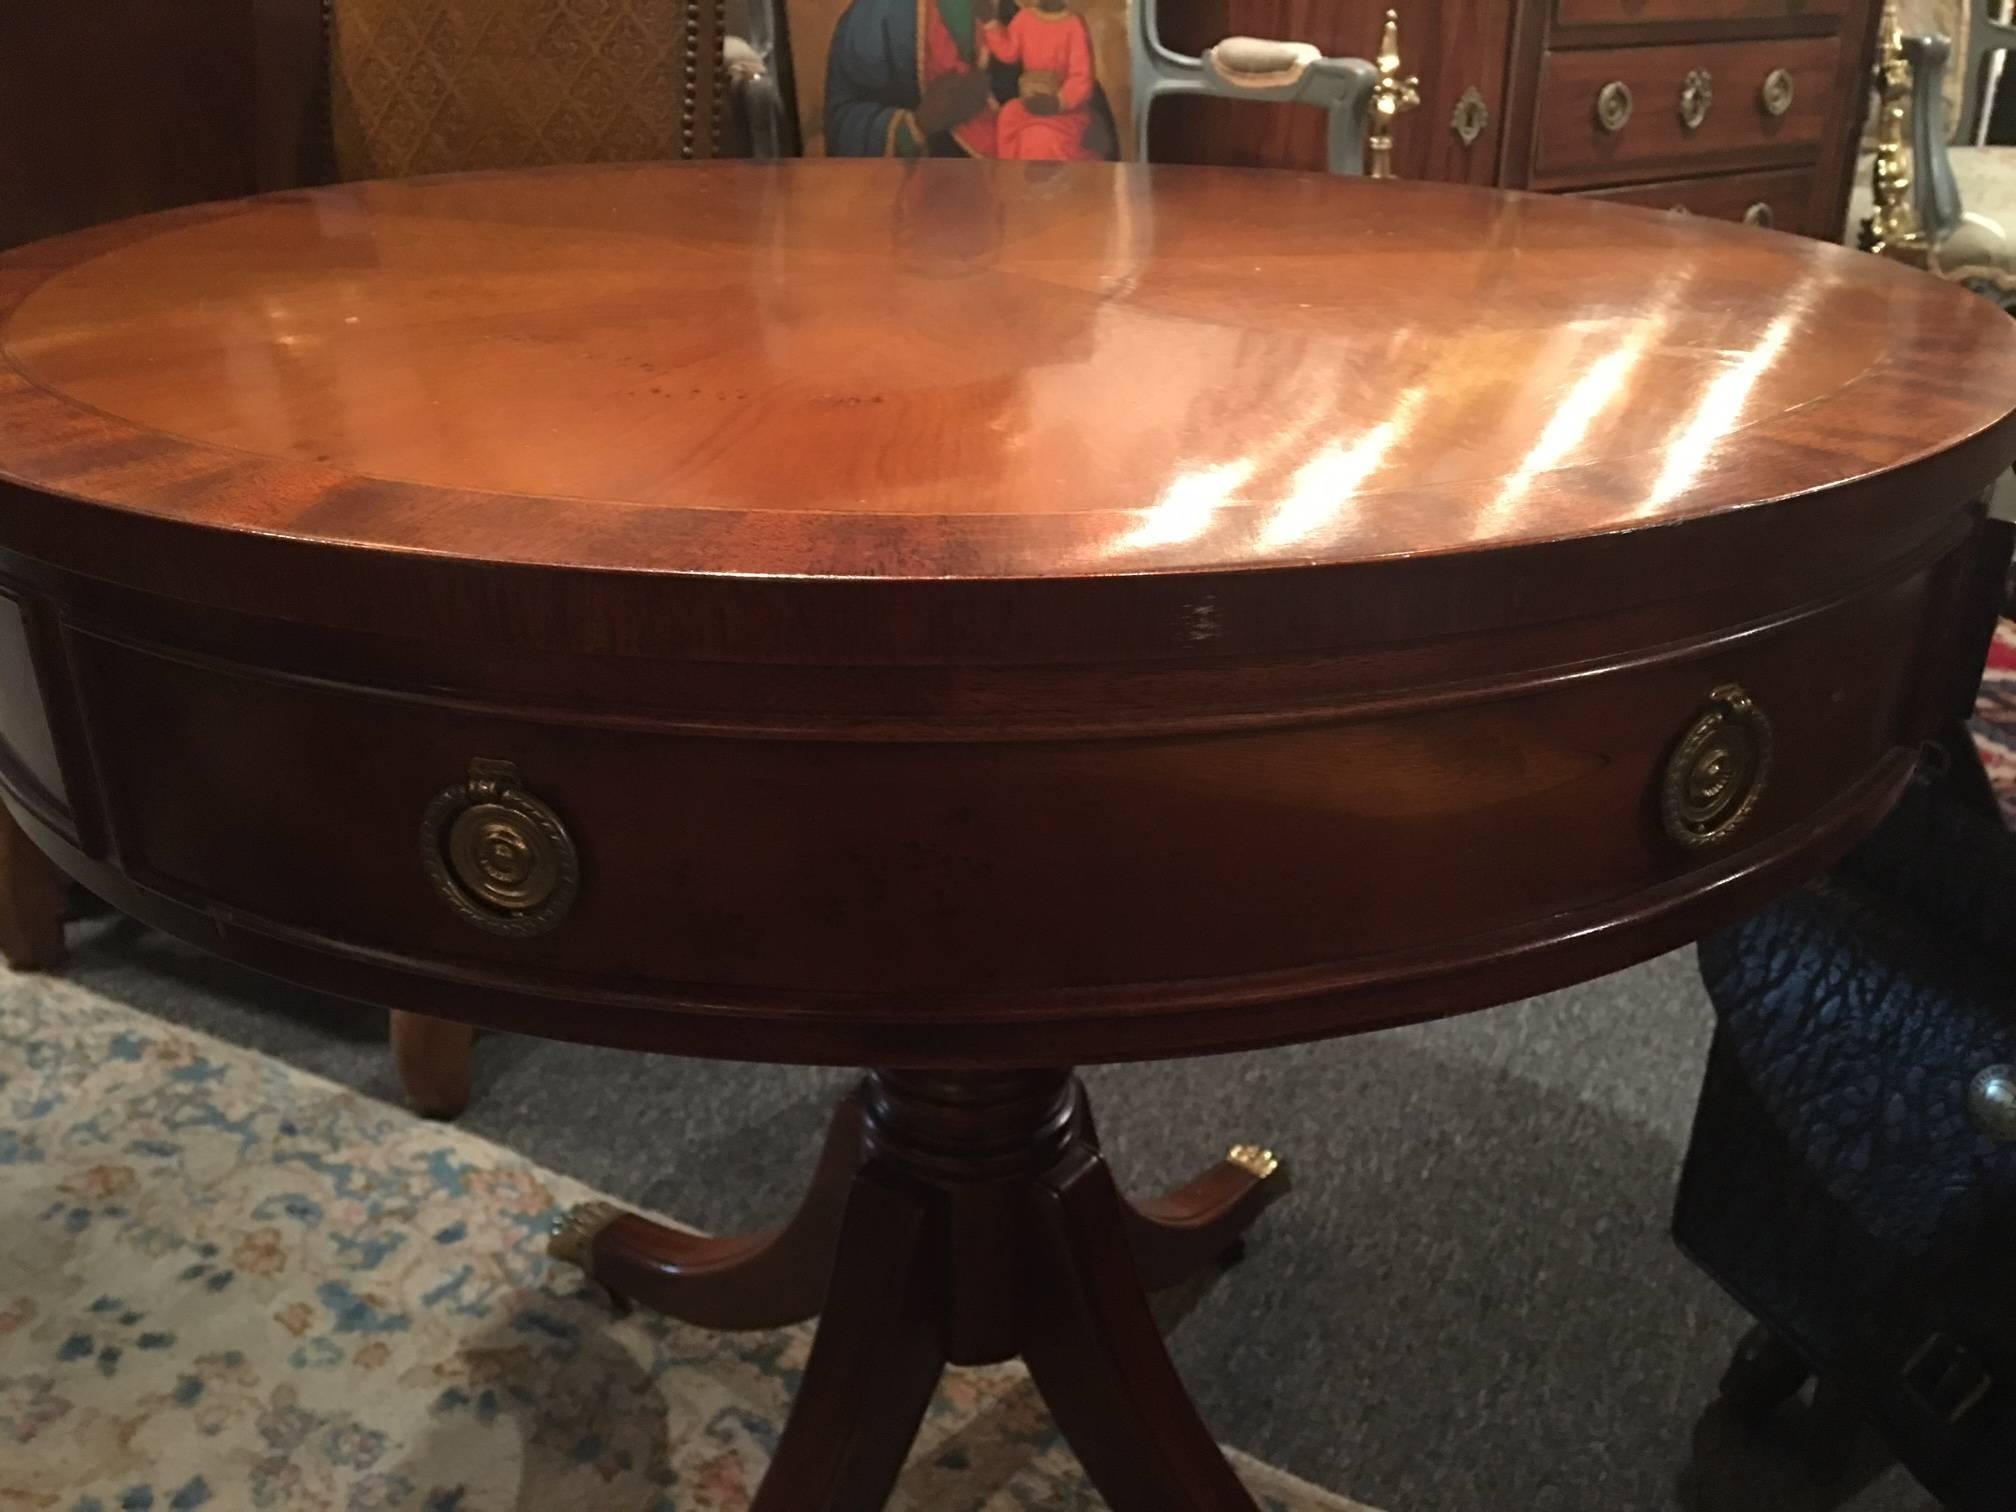 American Mahogany Round Side Table with a Single Drawer on Casters, Mid-20th Century